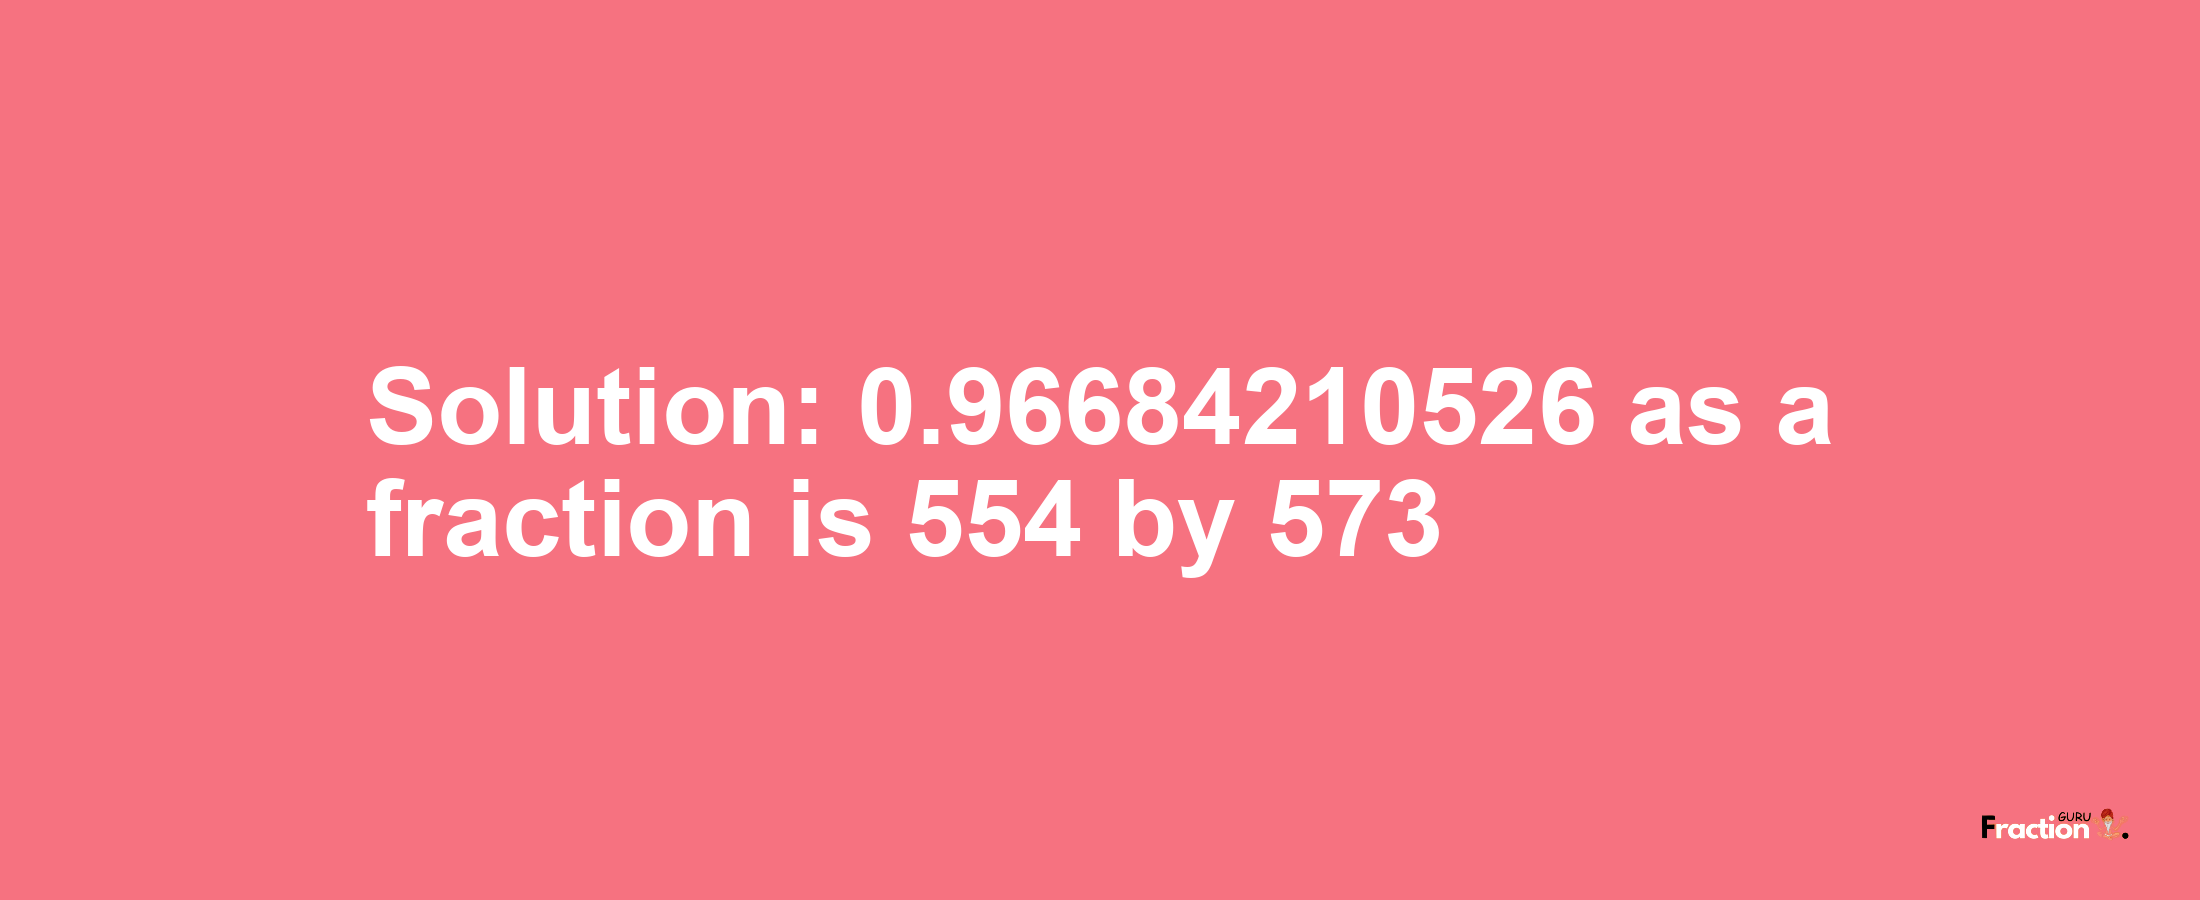 Solution:0.96684210526 as a fraction is 554/573